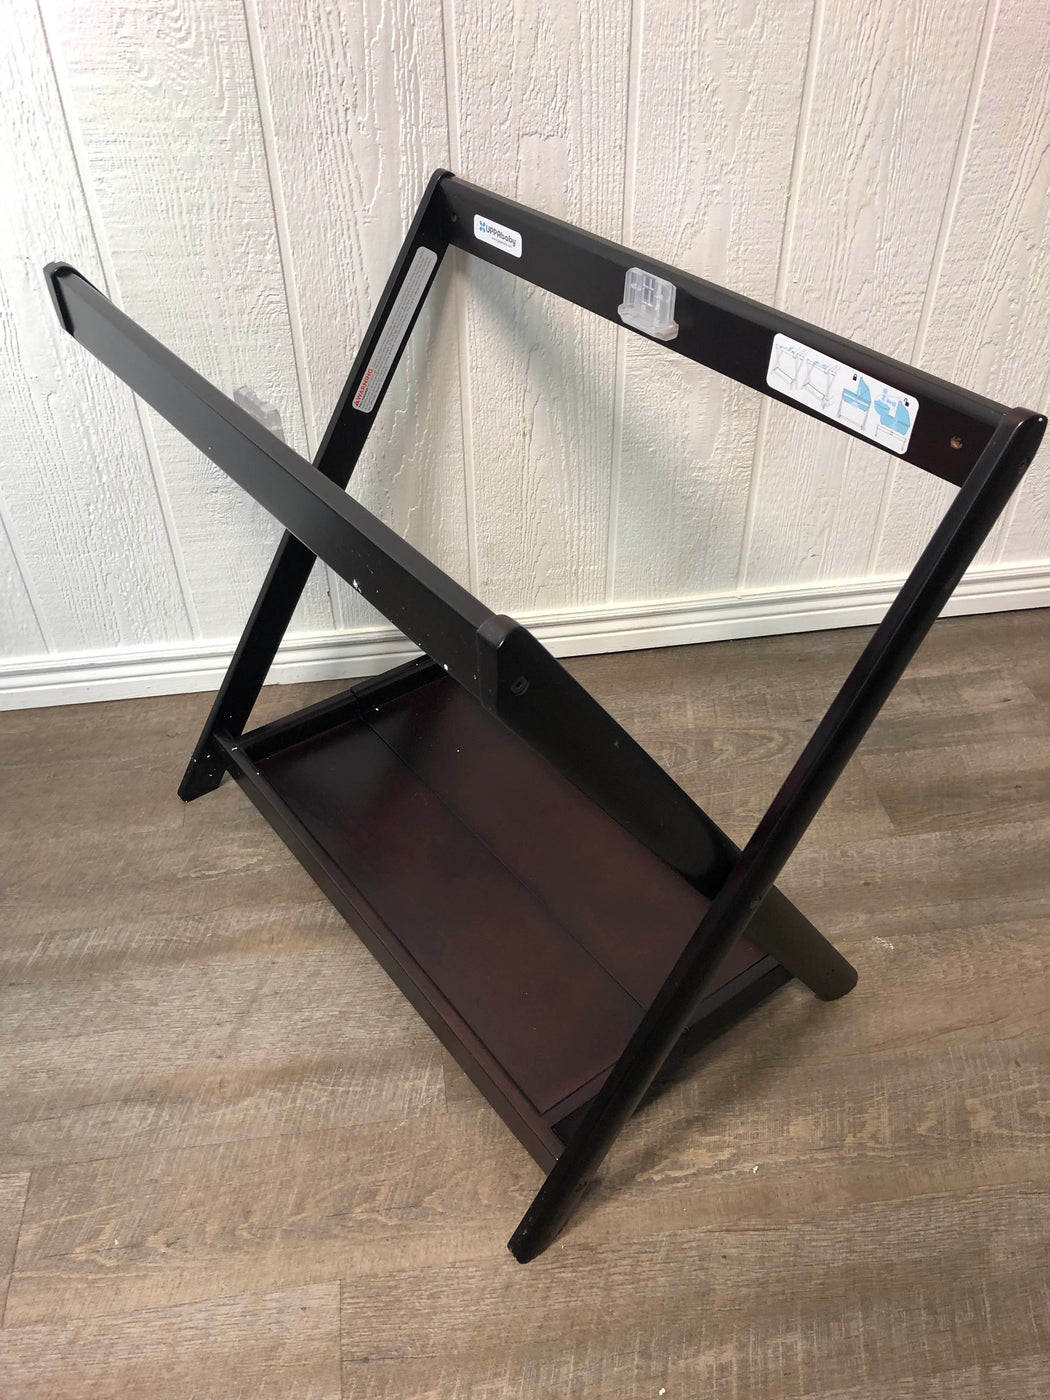 uppababy stand used